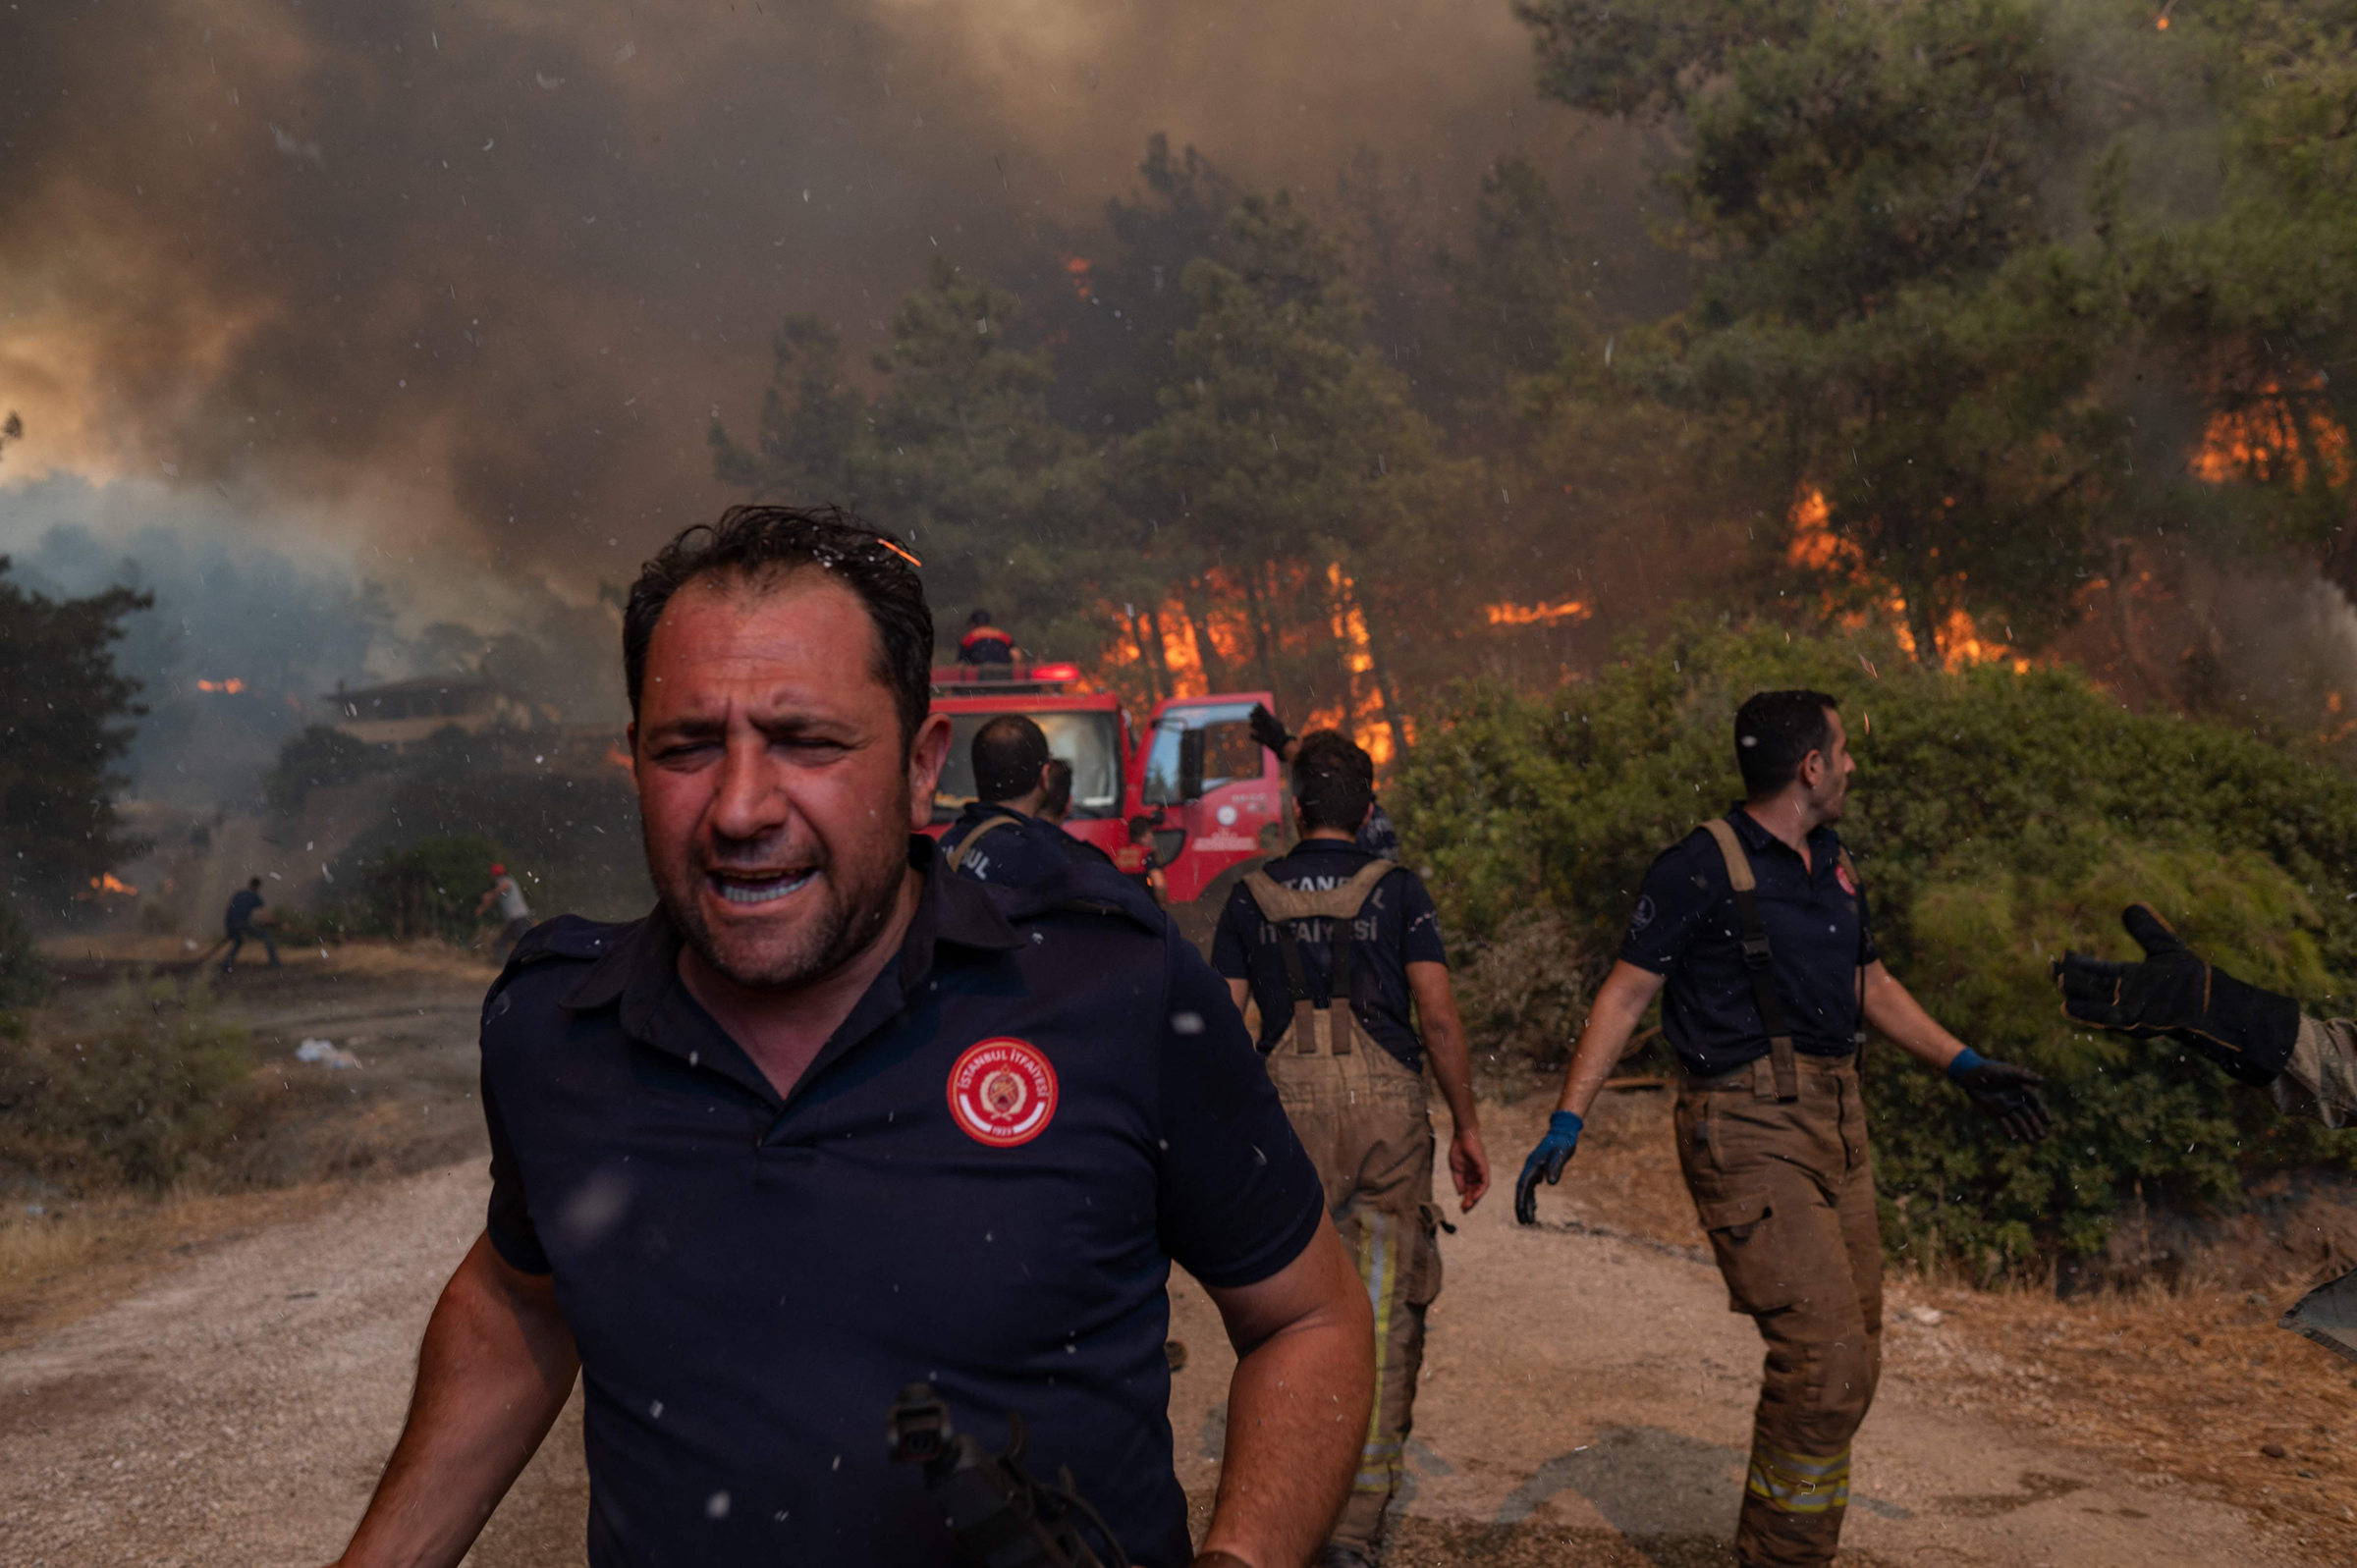 Firefighters battle a wildfire in Mugla, Marmaris district, Turkey, on Aug. 2. Turkey's struggles against its deadliest wildfires in decades come as a blistering heatwave grips southeastern Europe. (Yasin Akgul—AFP/Getty Images)